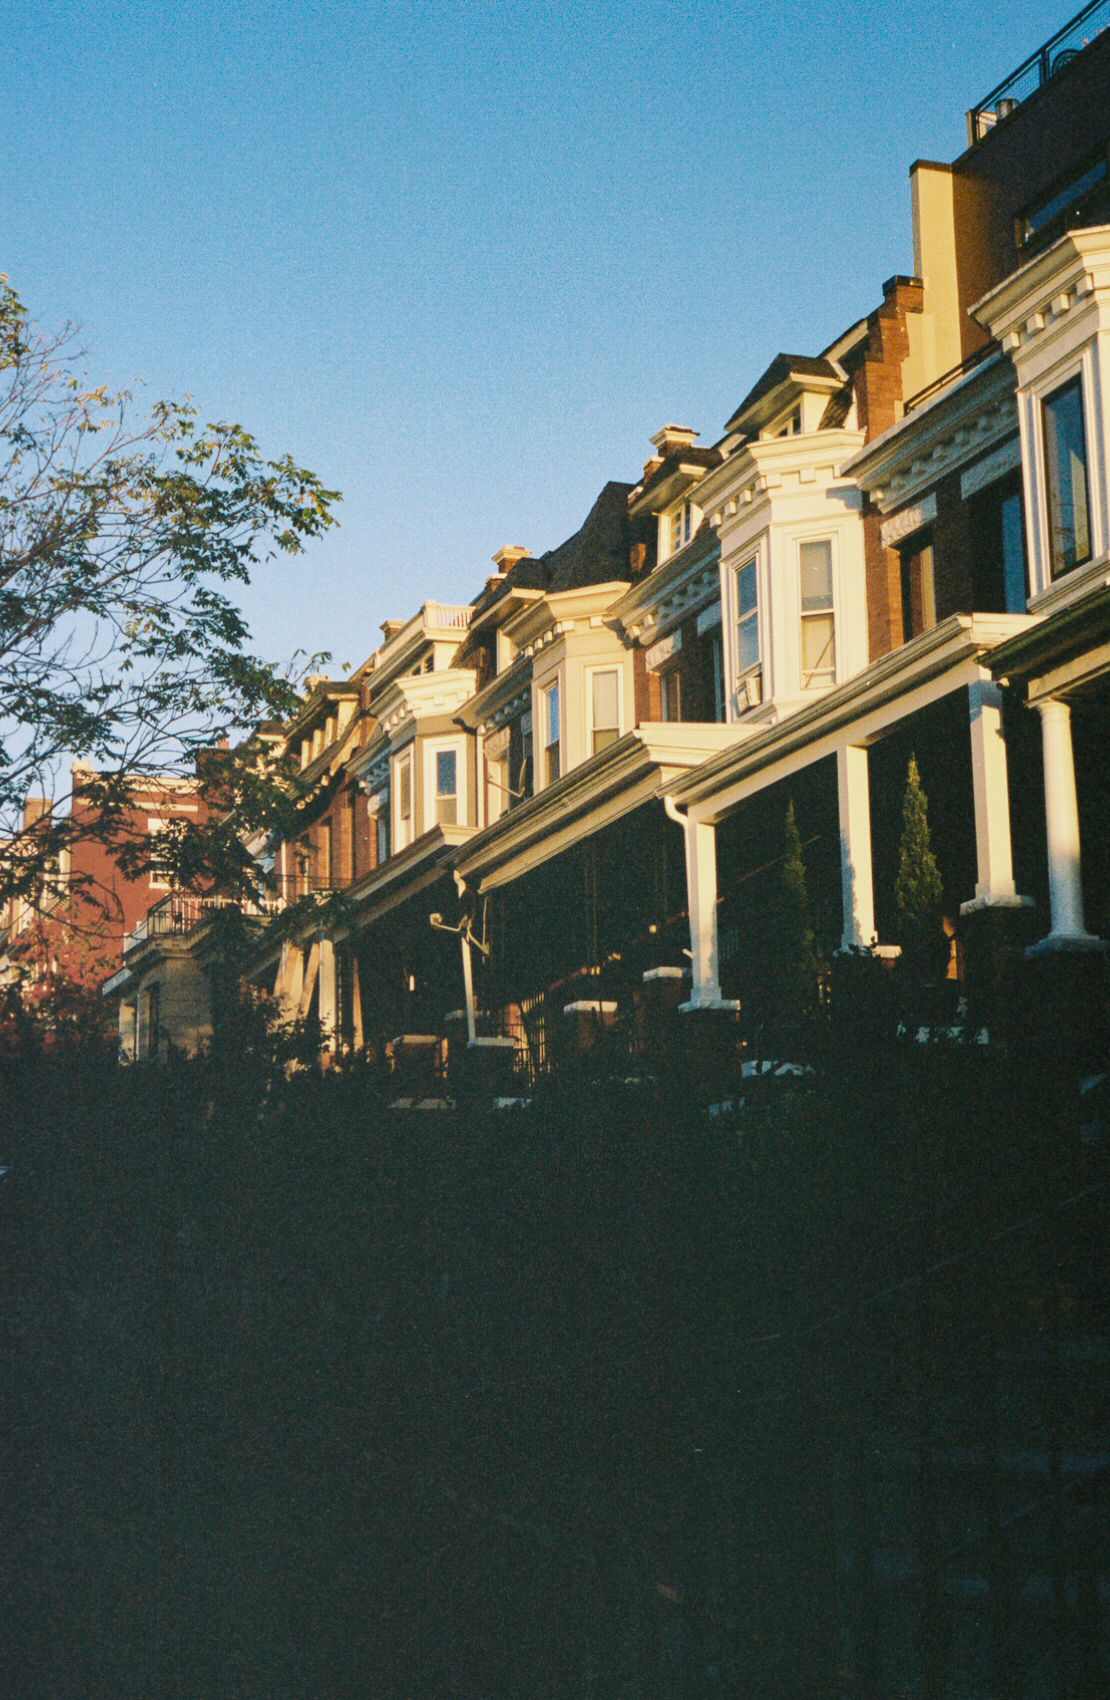 A row of historic homes at dawn, photographed in Eckington, near Howard University in Washington, DC